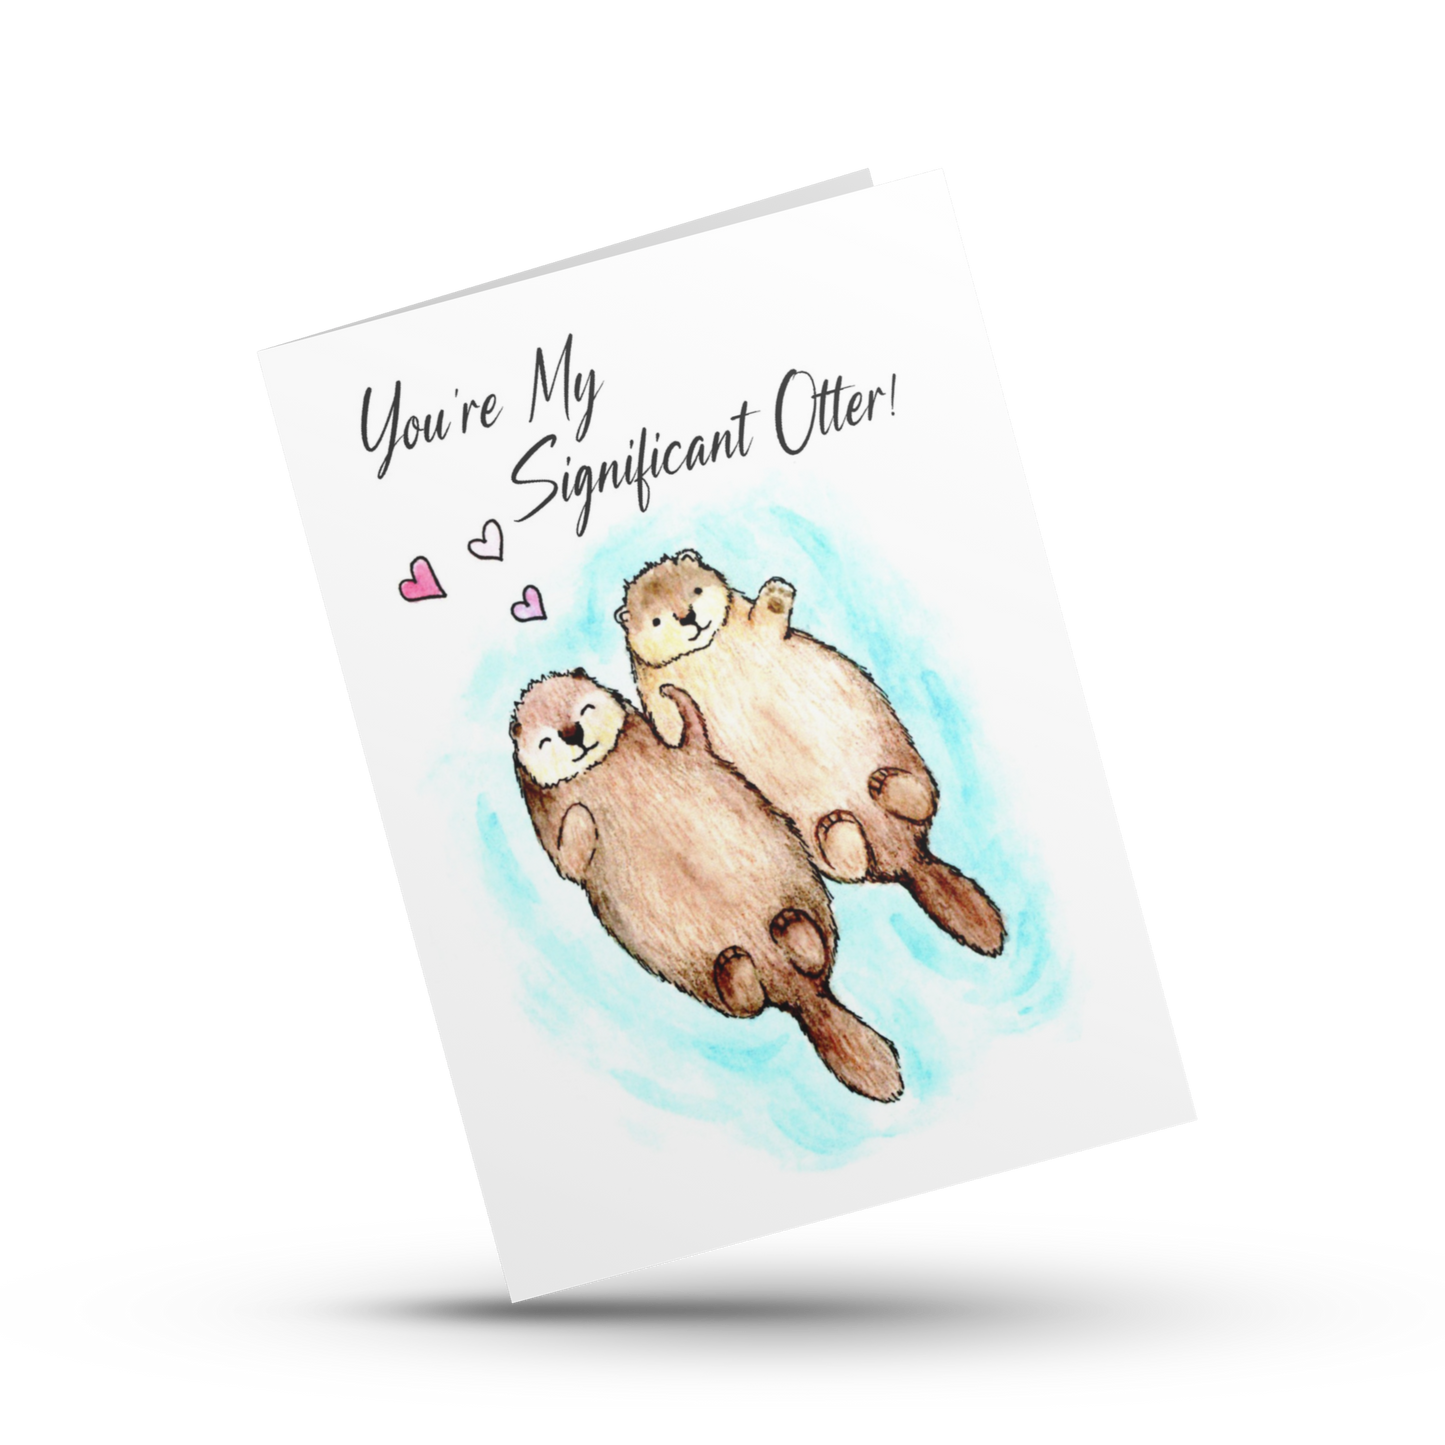 To My Significant Otter Greeting Card